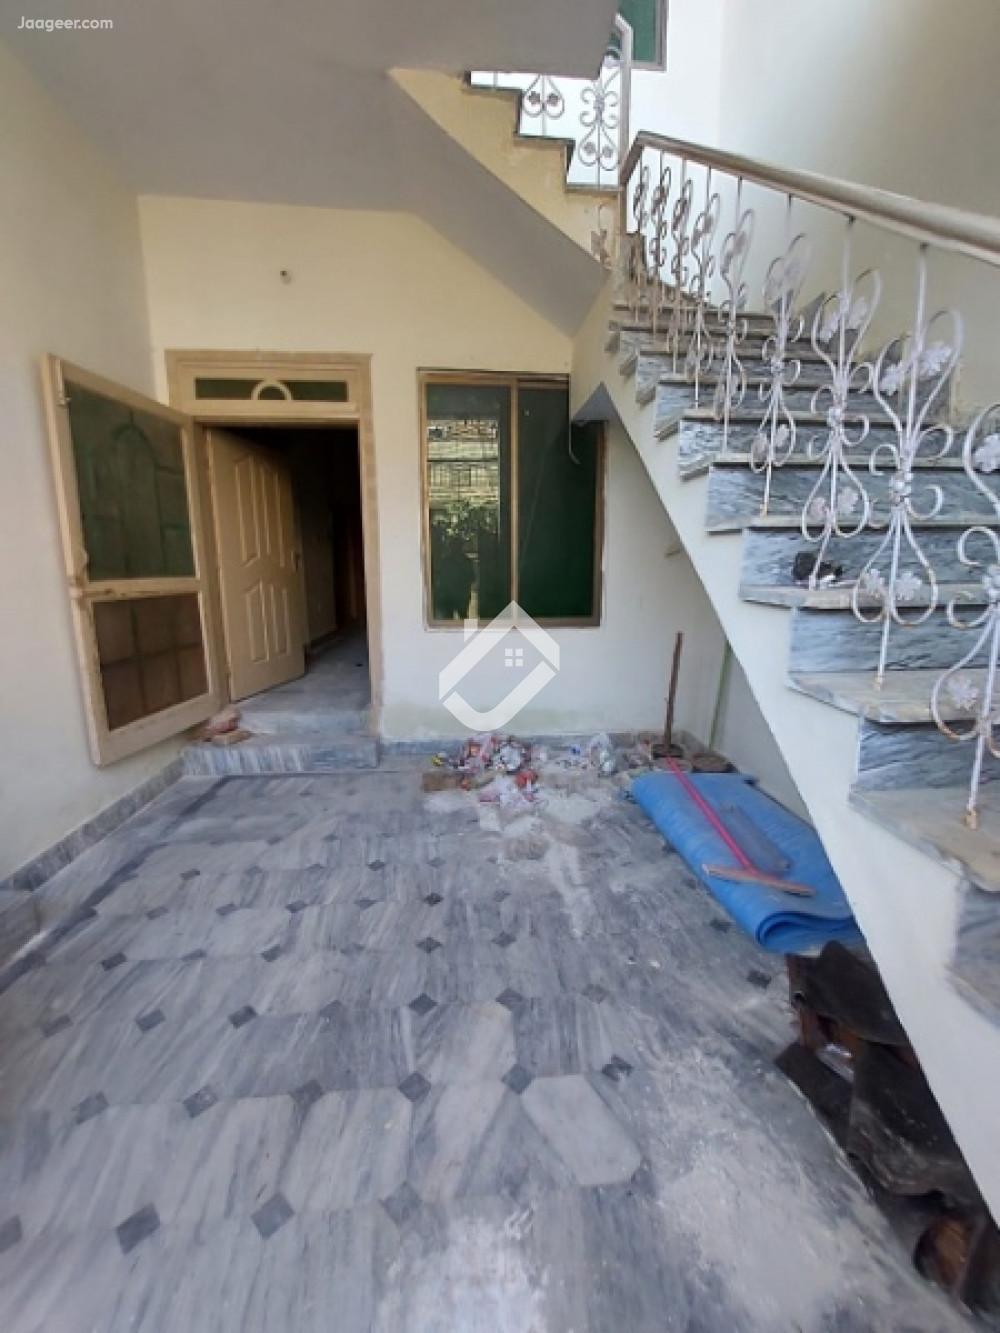 View  5 Marla Double Storey House For Rent In Cheema Colony   in Cheema Colony, Sargodha